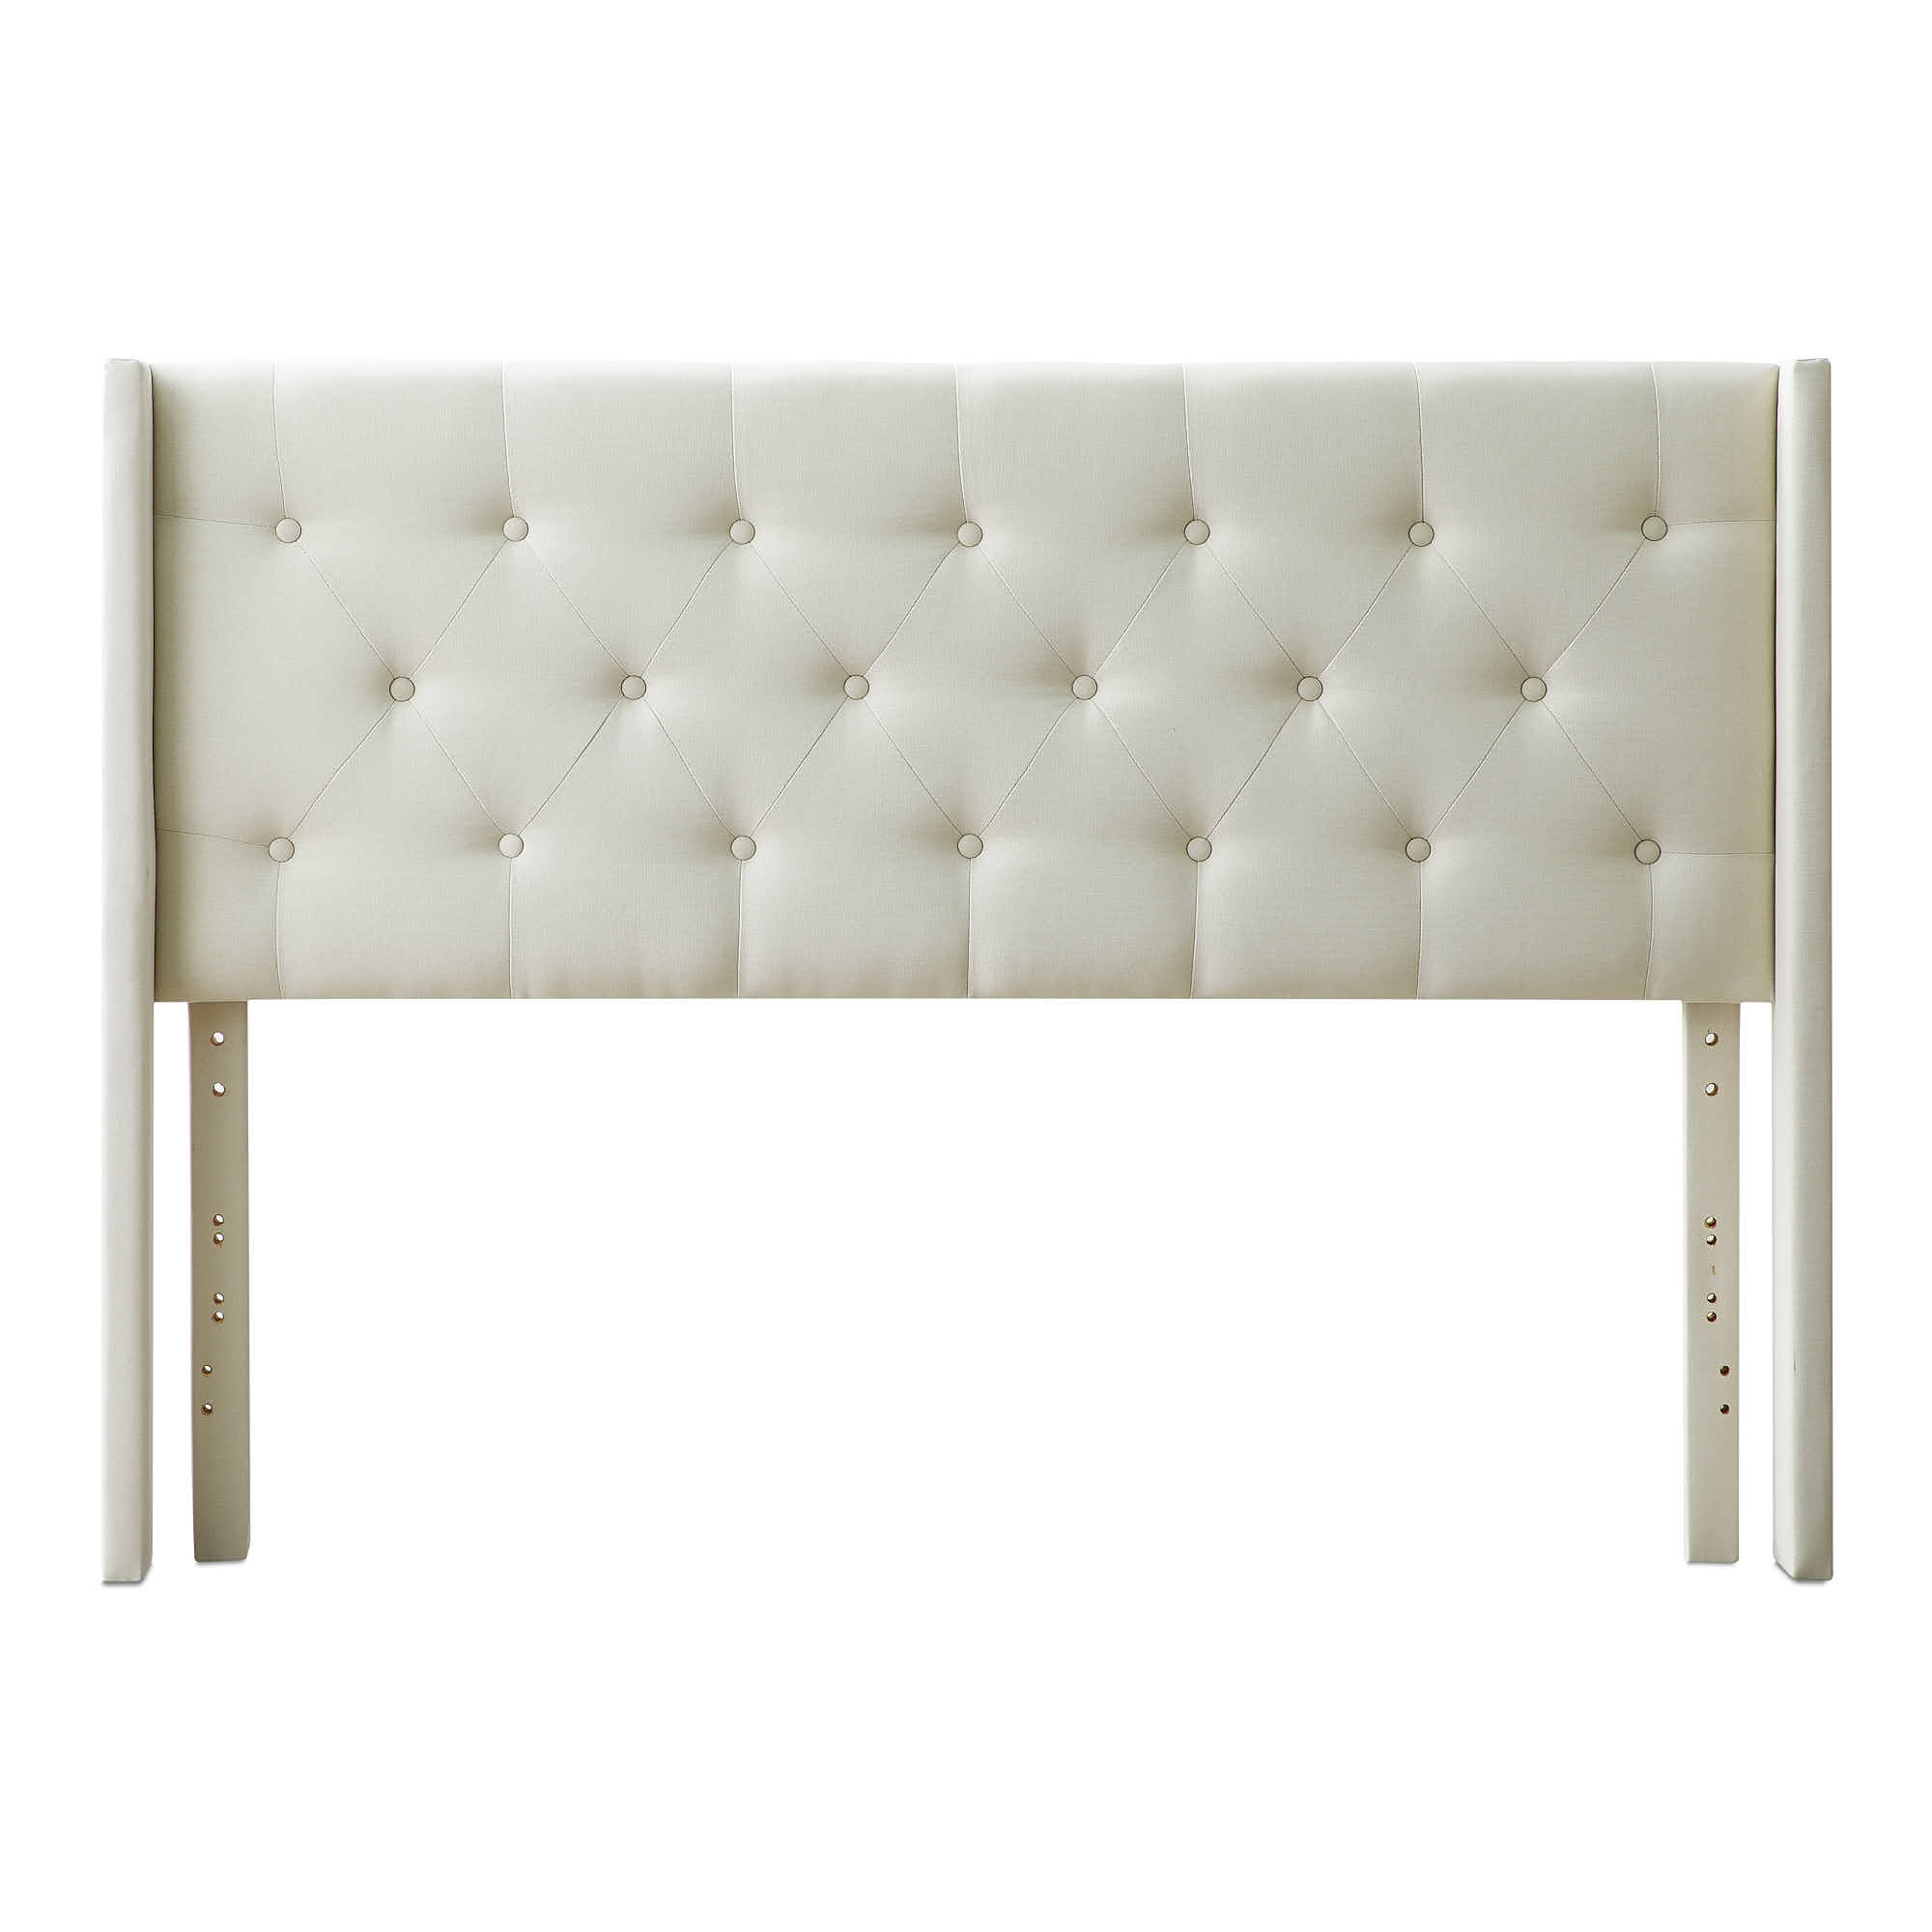 Rest Haven Button Tufted Upholstered Headboard, King/Cal King, Cream - image 4 of 9